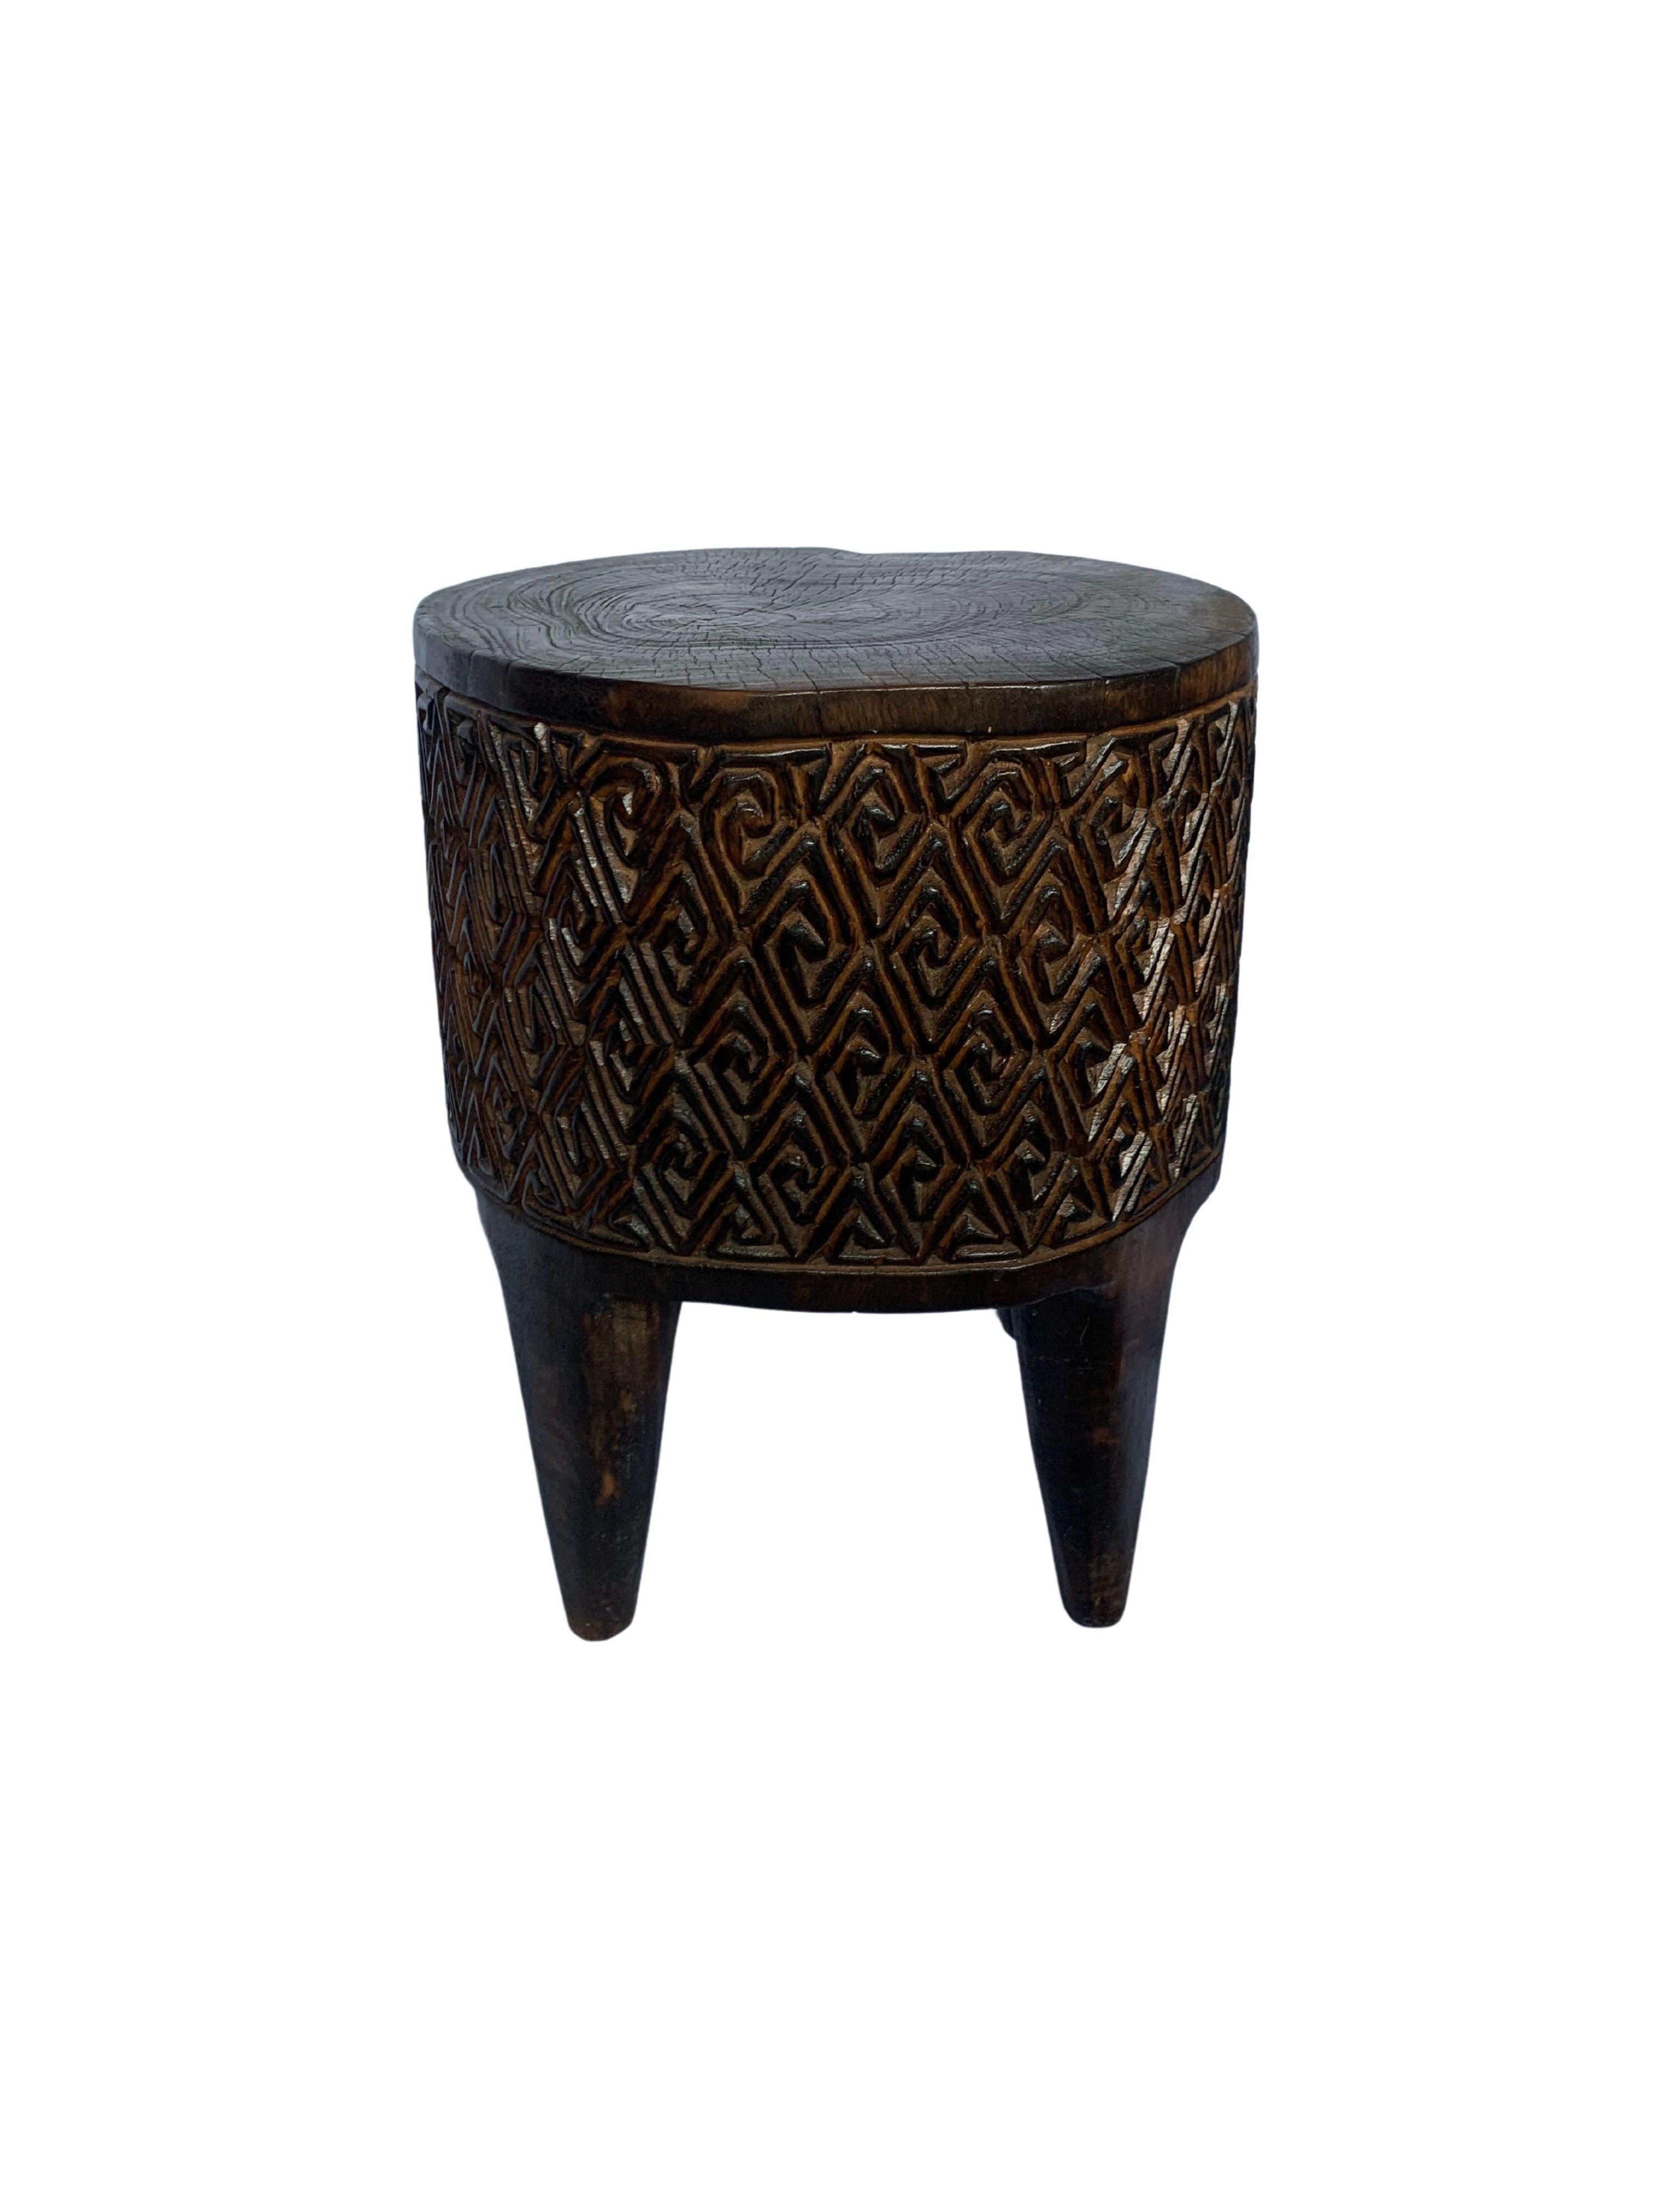 A wonderfully sculptural round side table with a wonderful hand-carved design on its exterior. Its neutral pigment and subtle wood texture makes it perfect for any space. A uniquely sculptural and versatile piece certain to invoke conversation. This